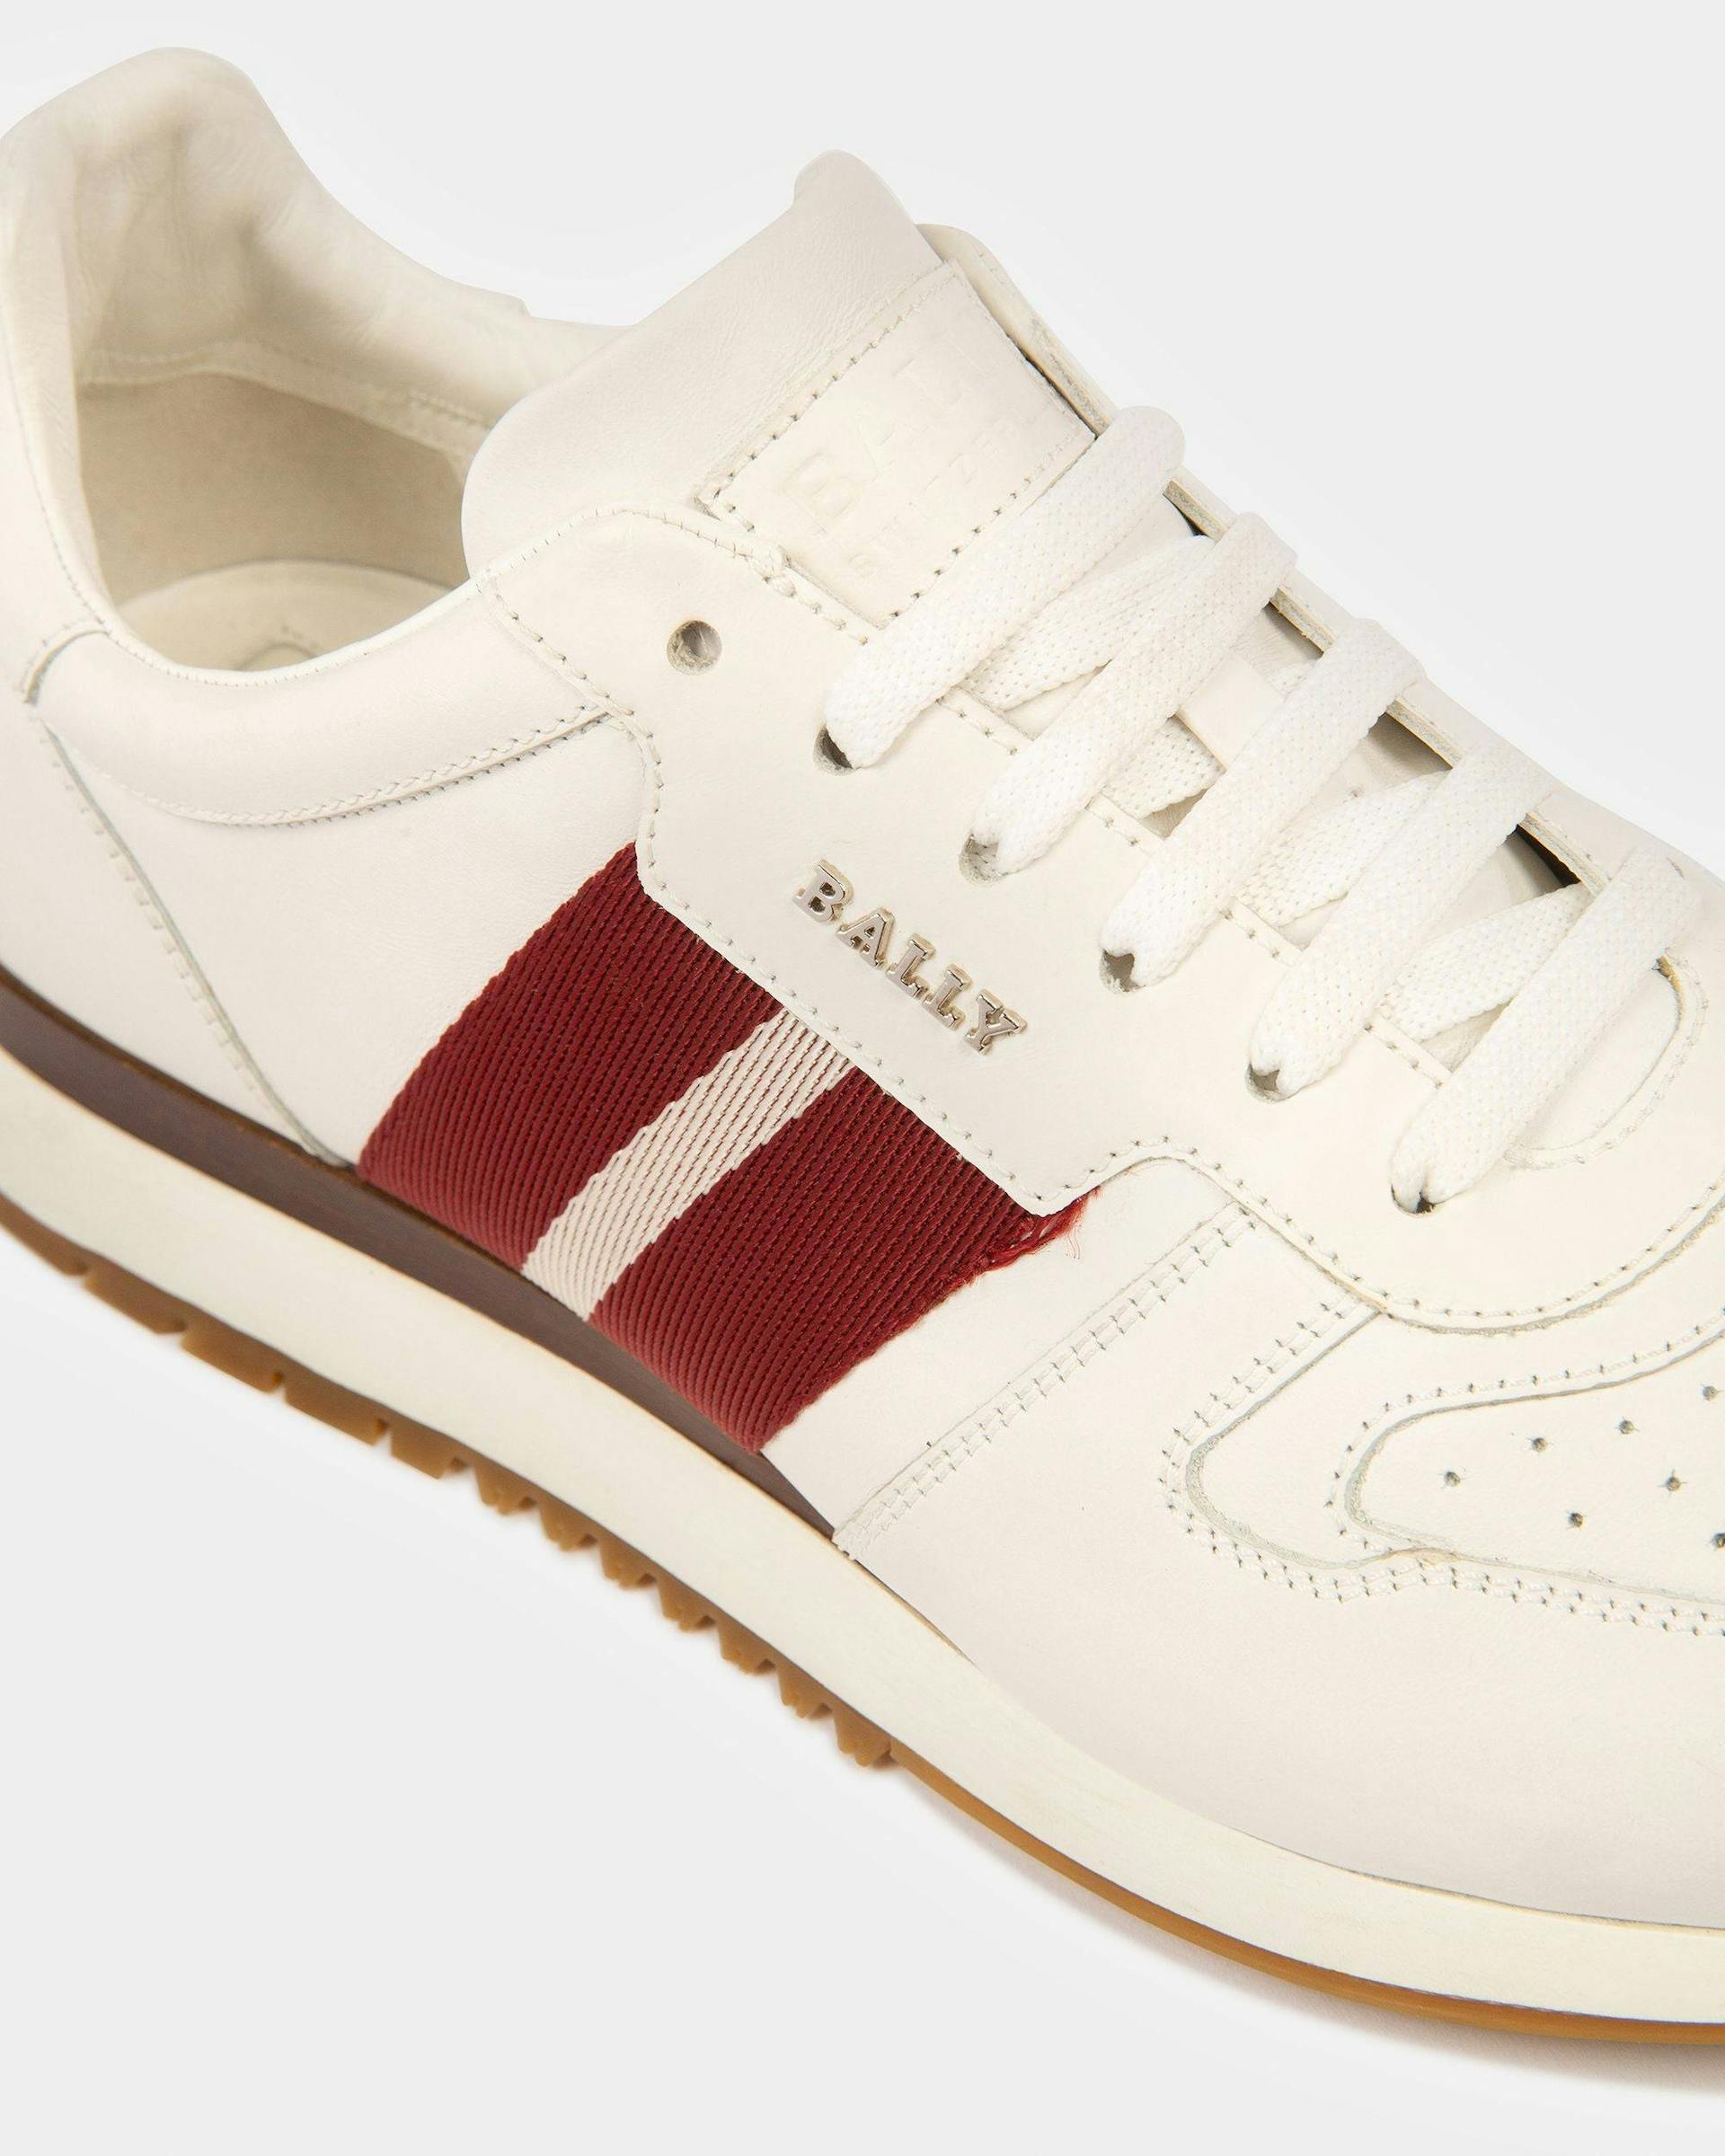 Astel Leather Sneakers In White - Men's - Bally - 06